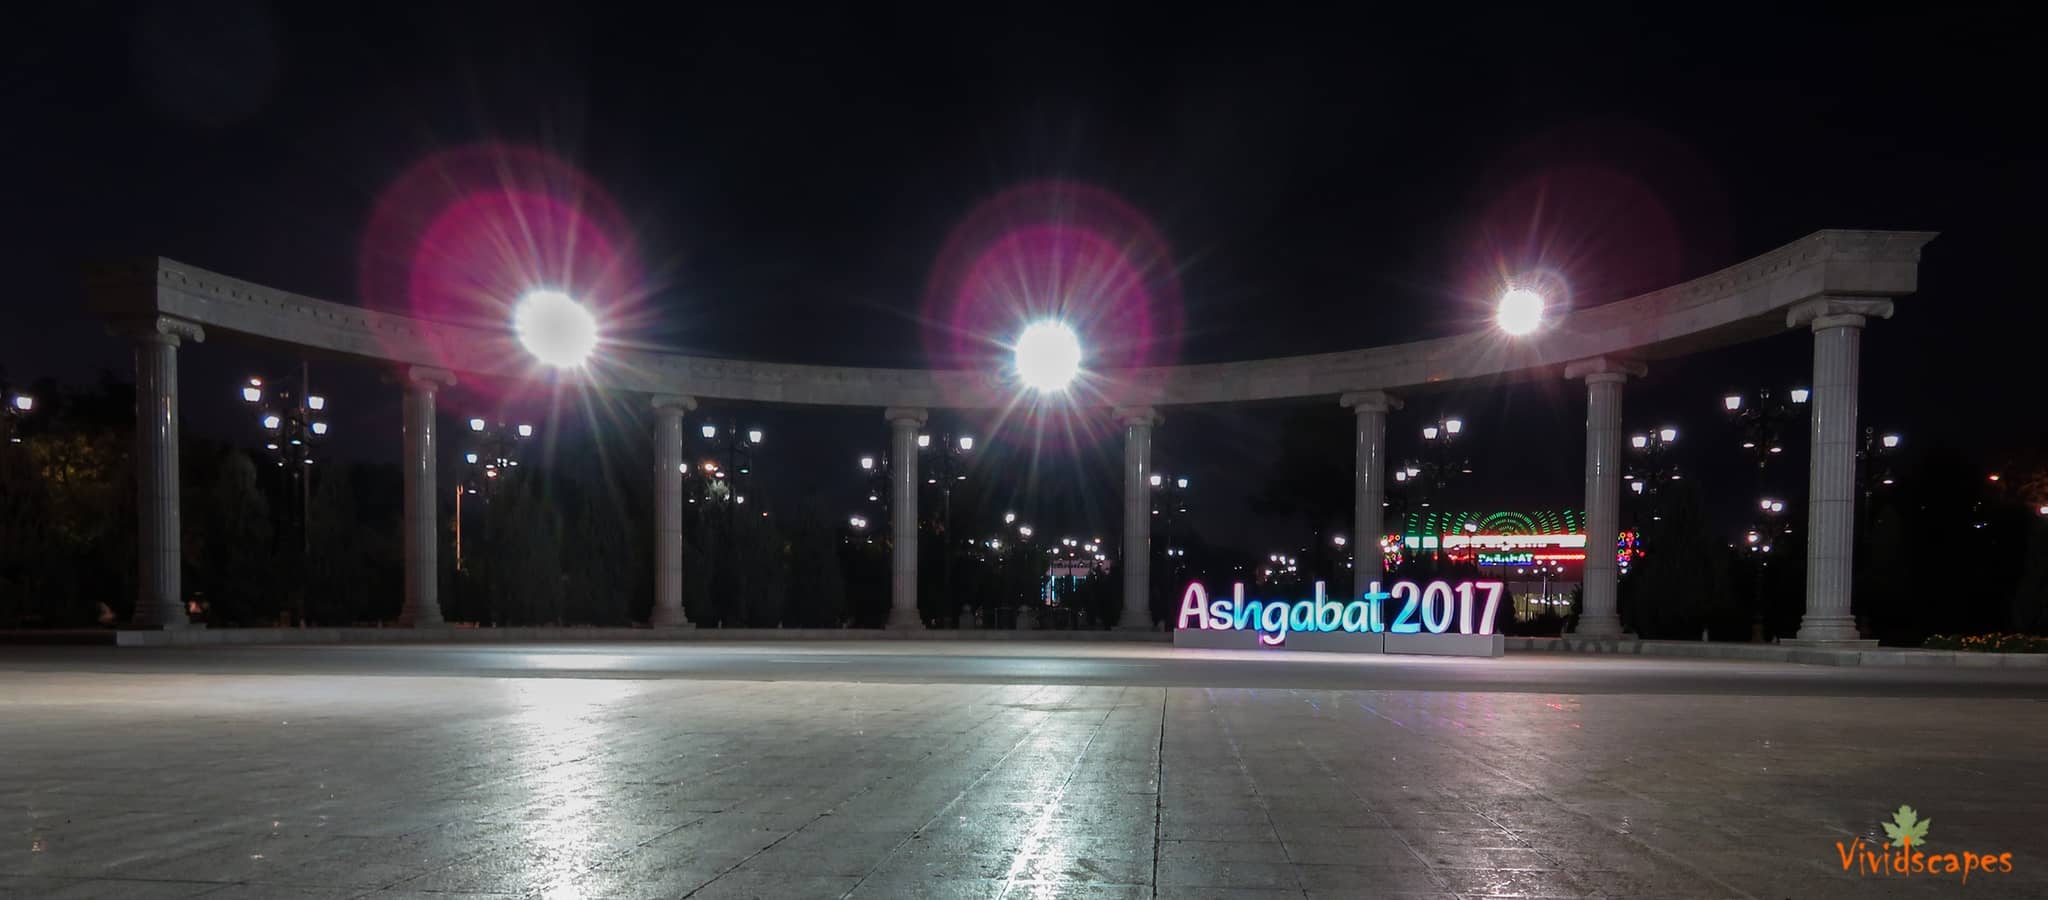 Ashgabat was host to the Central asian games 2017